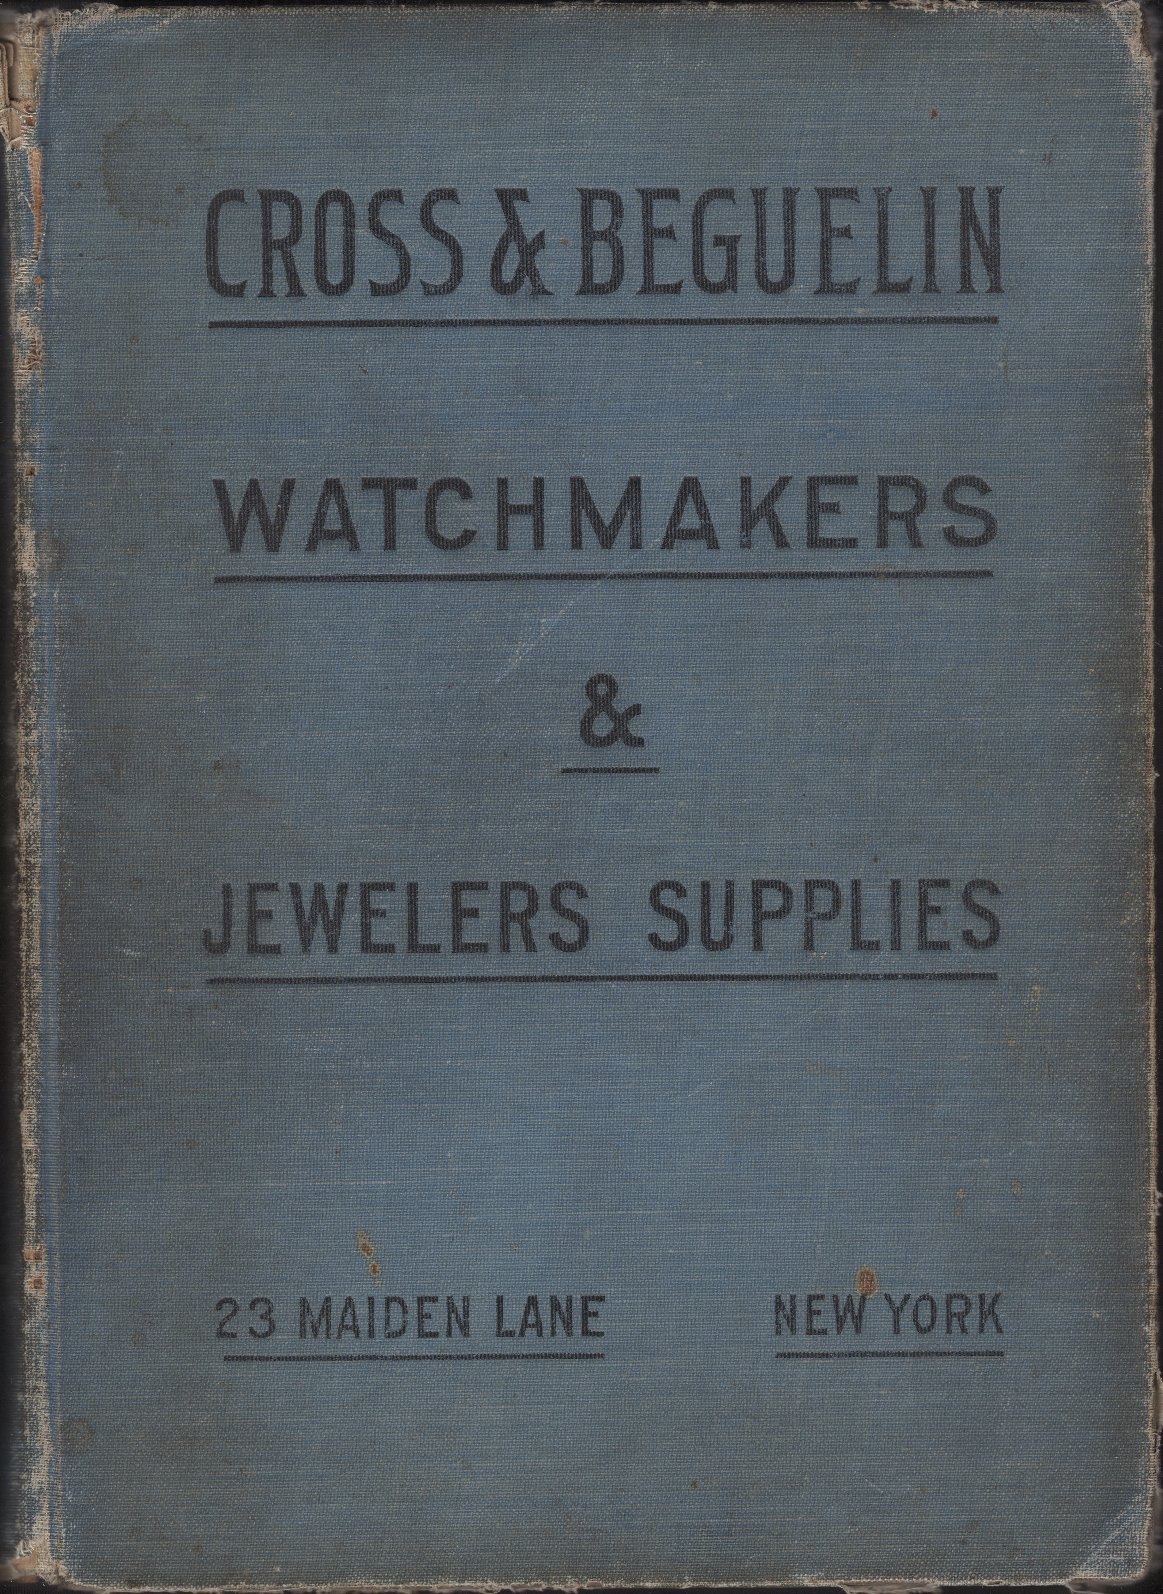 1910 Cross & Beguelin: New Columbus Parts Material Catalog Cover Image